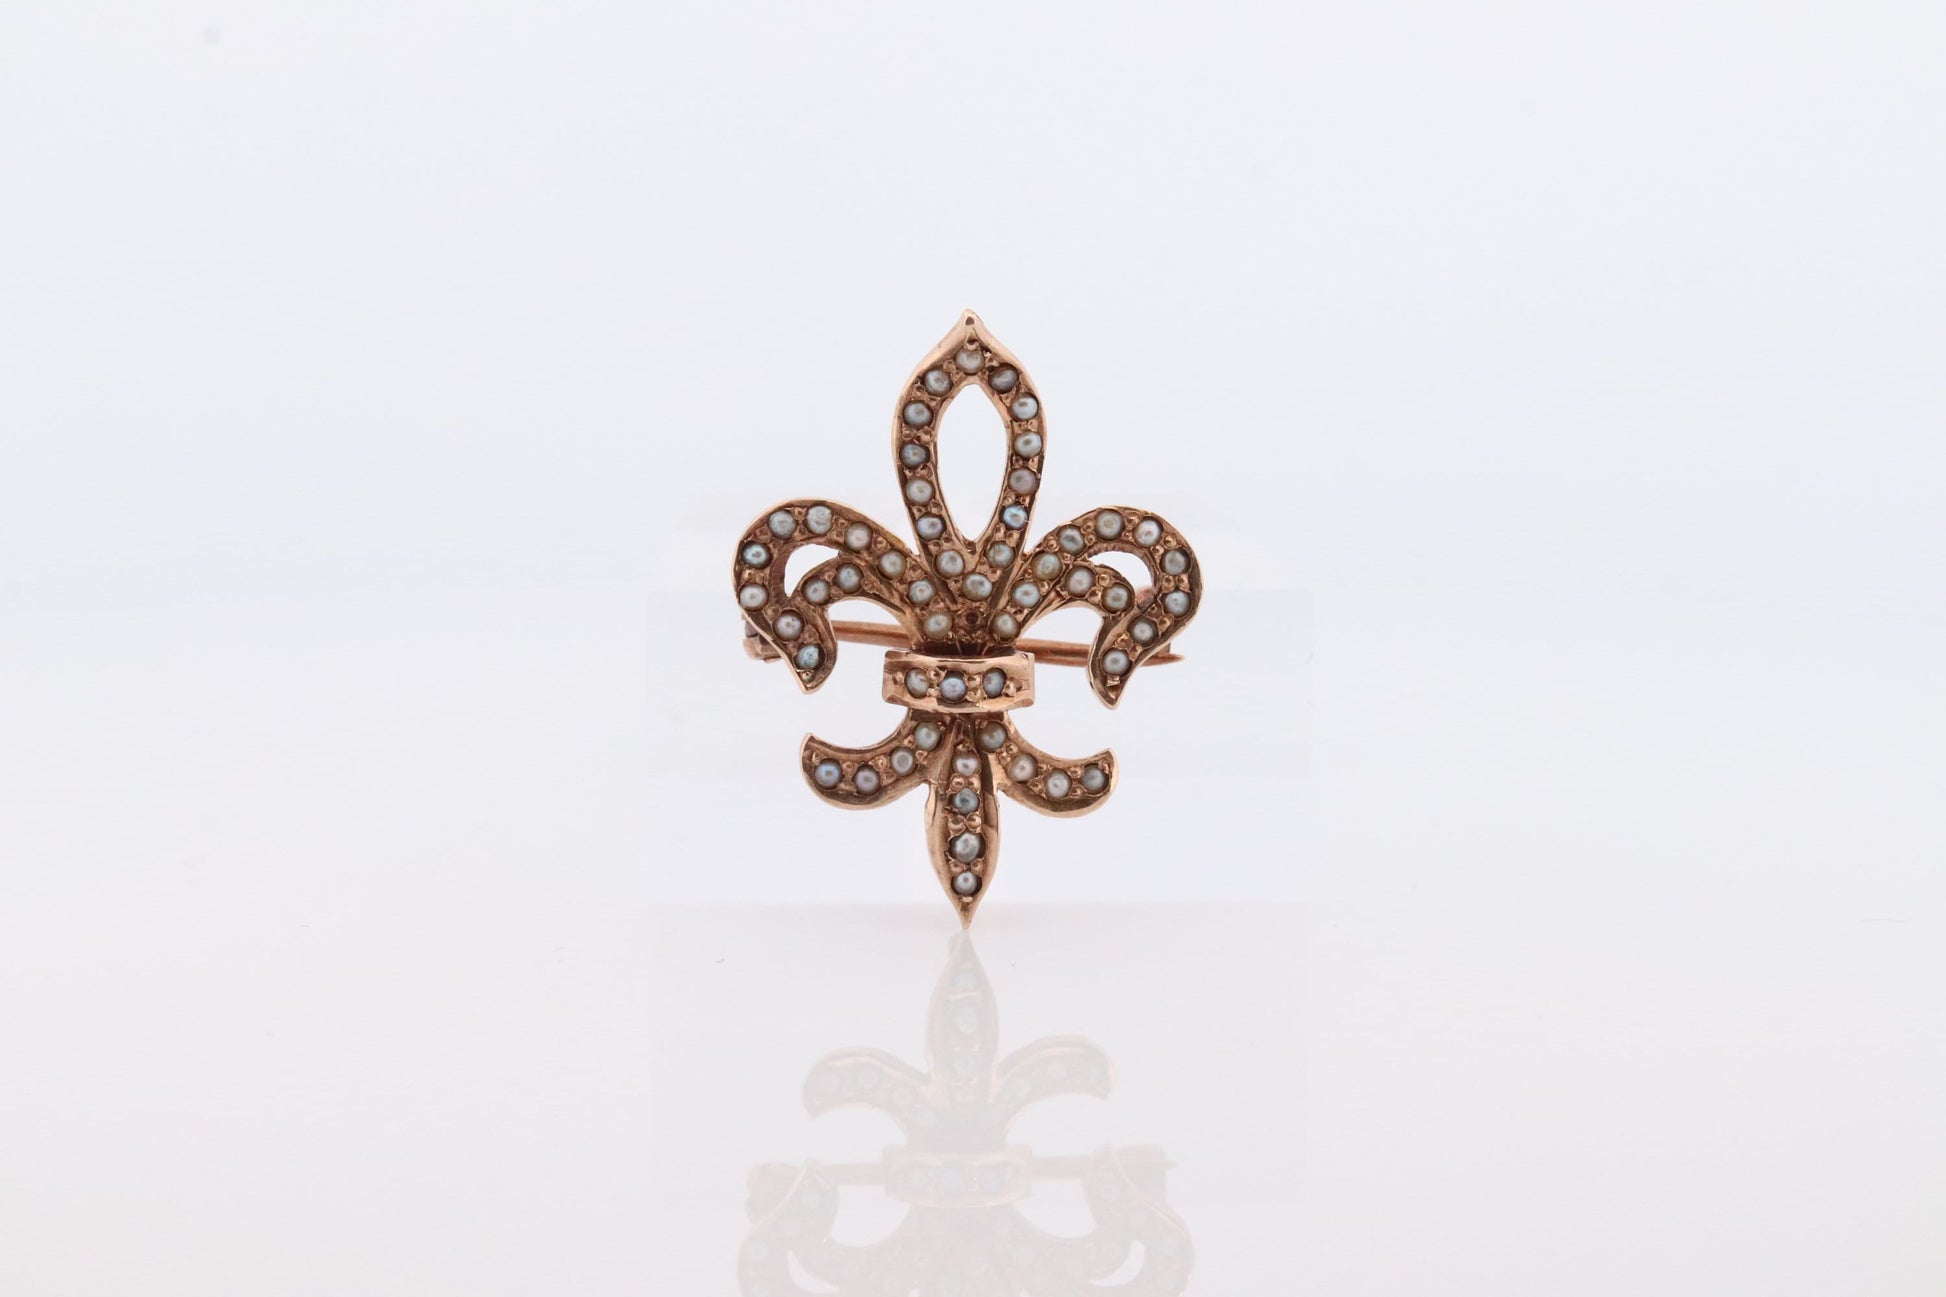 Antique Fluer De Lis Brooch. 10k Pearl Seed encrusted 19th Century French Flower Brooch Pin Pendant. st(115)